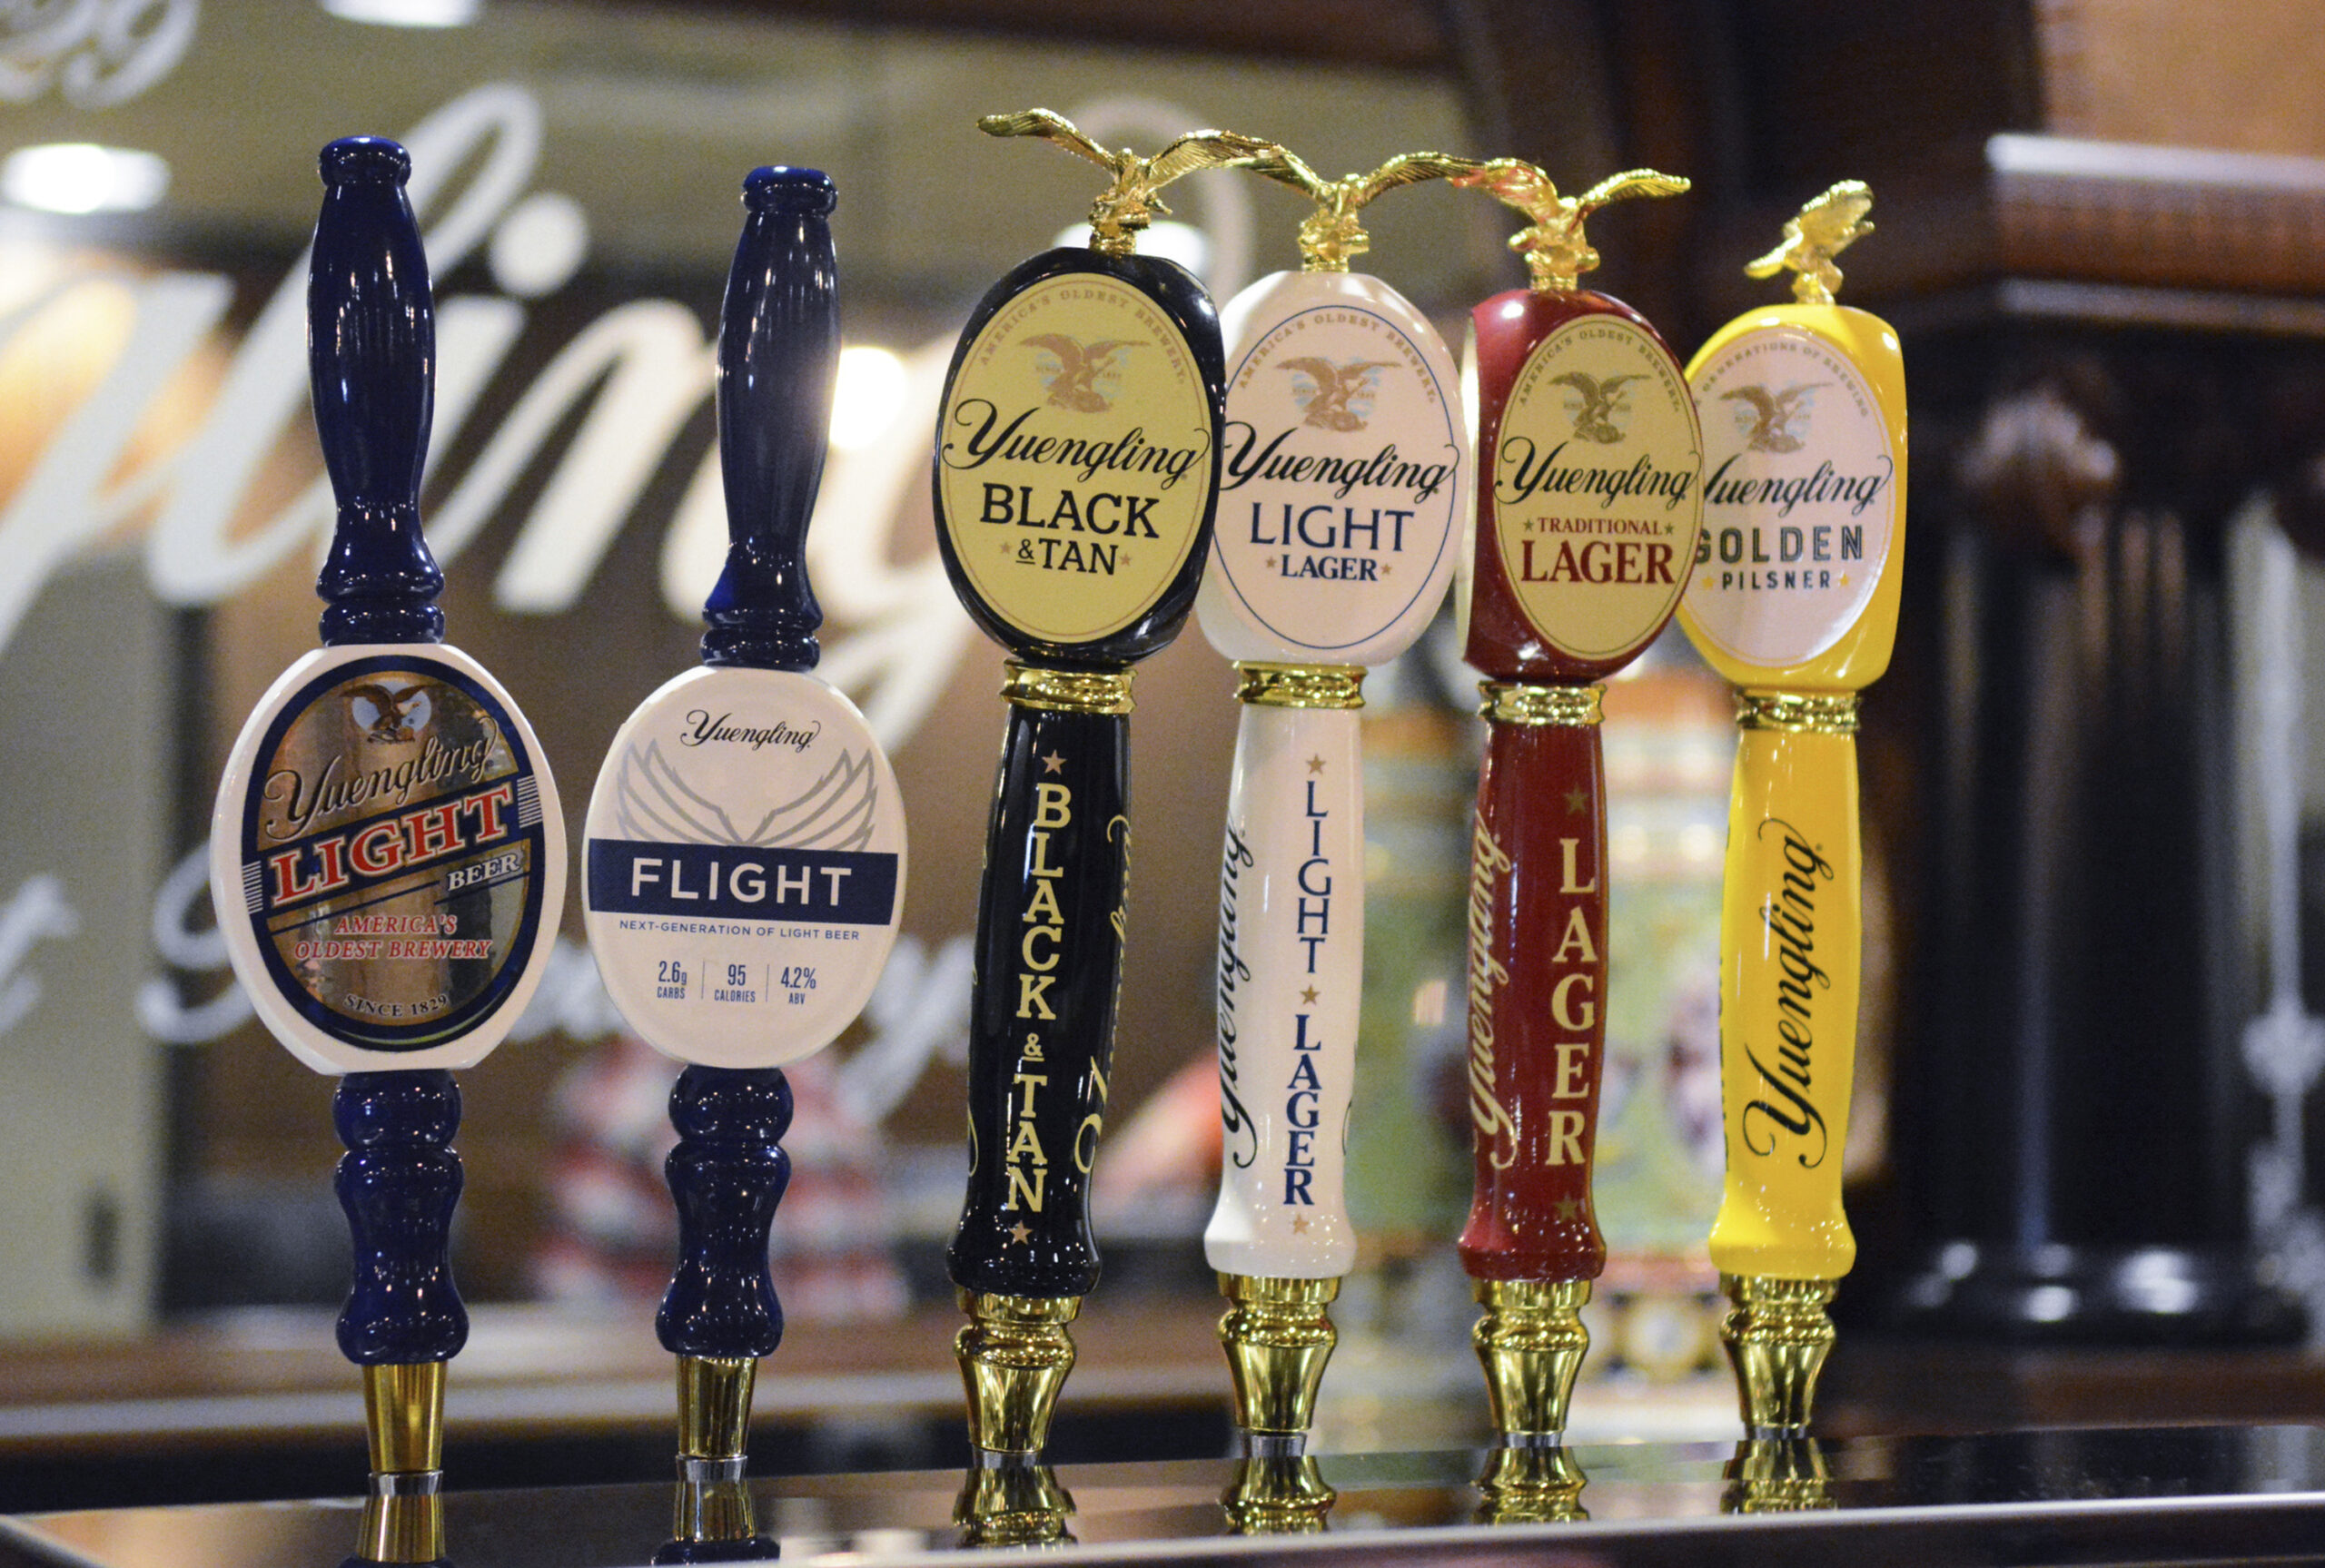 FILE—In this Feb. 21, 2020 file photo, Yuengling's new upscale light beer, Flight, is seen on tap with Yuengling's other beers at D.G. Yuengling & Son's Mill Creek brewery in Pottsville, Pa. A trademark tiff between America’s oldest beer maker and its best-selling beer brand appears to be over before it really began. Last week, D.G. Yuengling & Son demanded its much larger rival, Anheuser-Busch, stop using a tagline for its forthcoming Bud Light Next zero-carb beer. Bud Light had been calling it the “next generation of beer.” Yuengling says that's too close to the trademarked slogan it uses for its Flight low-carb brew. (Lindsey Shuey/Republican-Herald via AP, File)